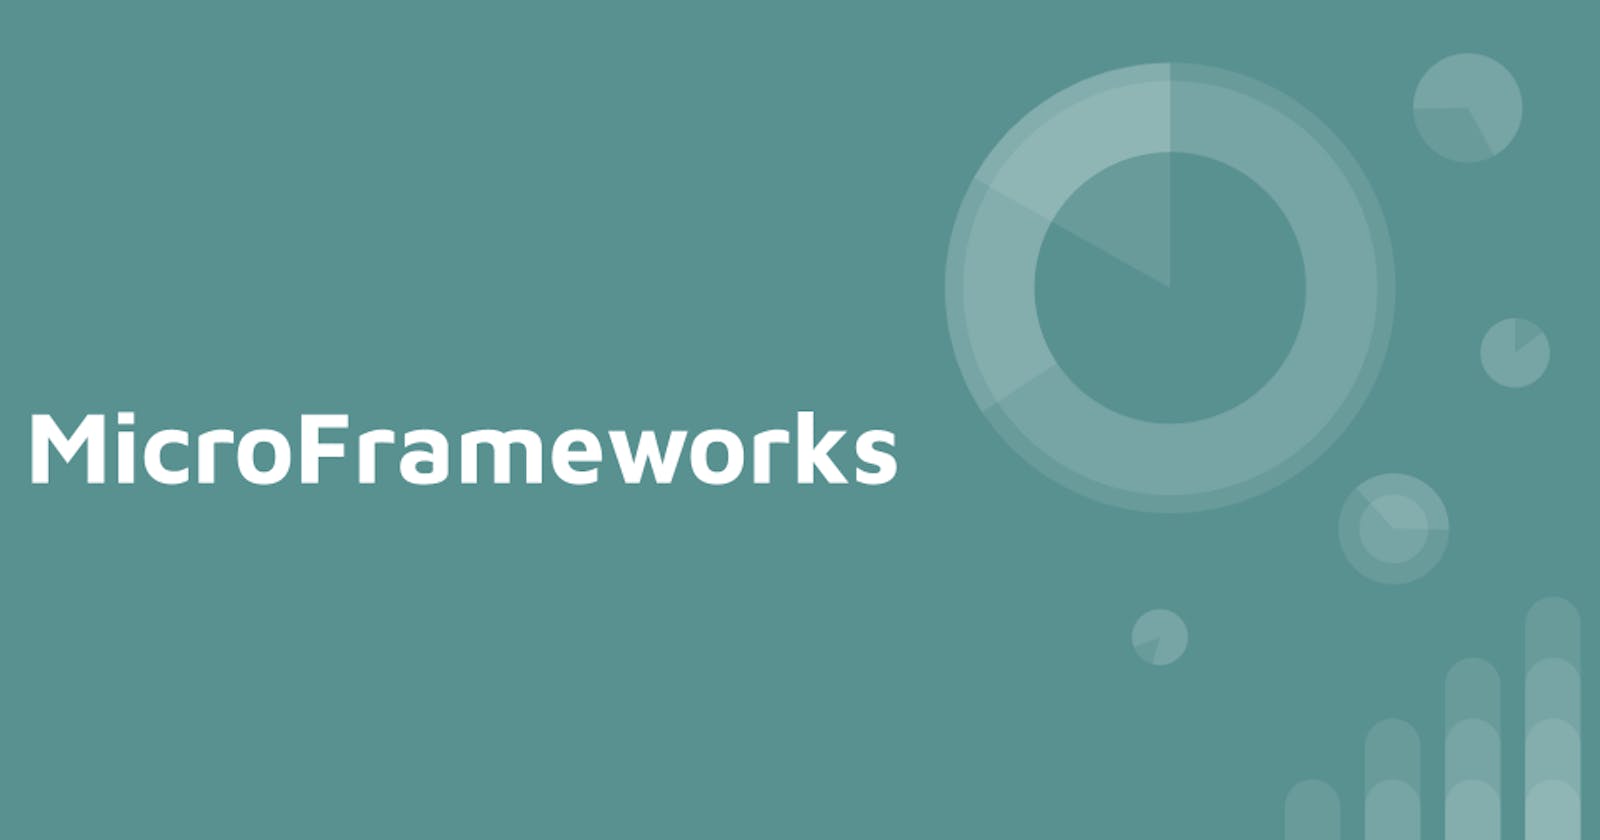 What are Microframeworks?